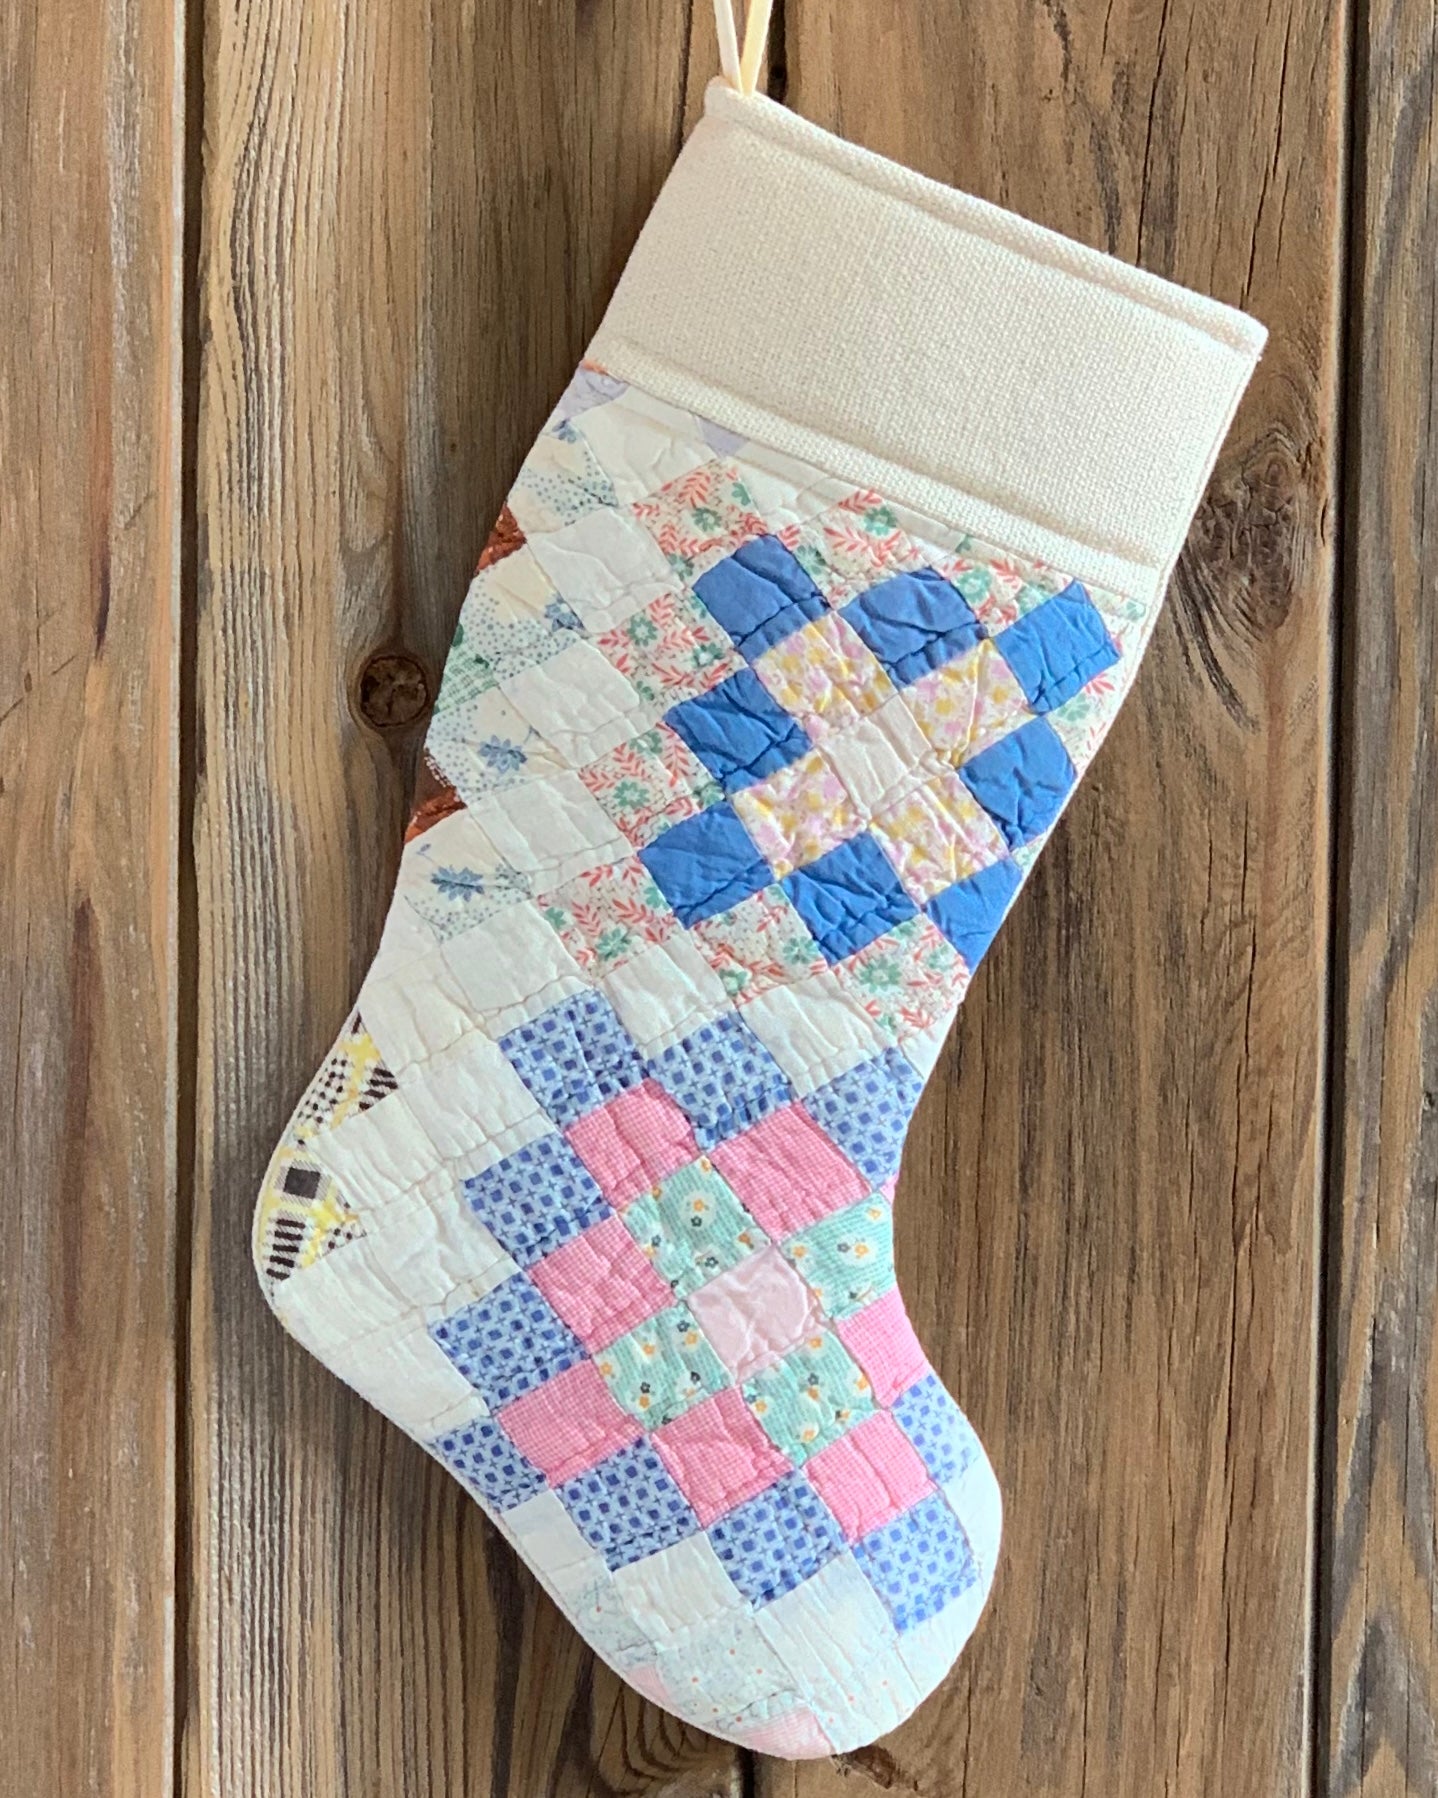 Vintage Quilt Christmas Stocking